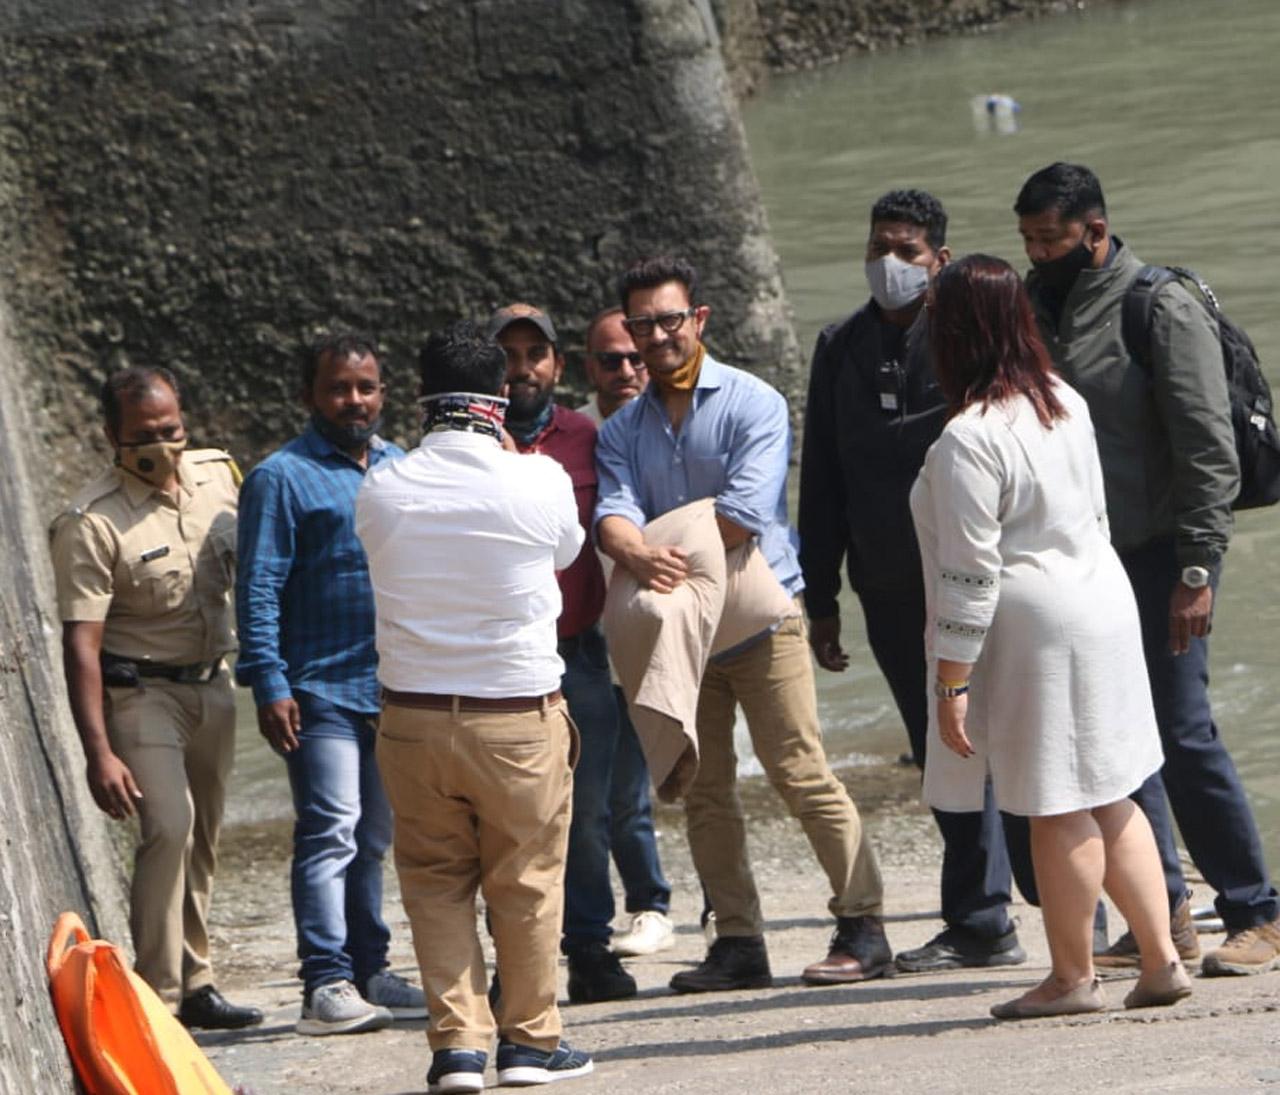 Aamir Khan obliged fans with pictures, as soon as he stepped out of the ferry. He sported a casual look - blue shirt, beige pants, leather boots, and of course wore a mask. Not to be missed, Aamir carried his pillow, that he never forgets to accompany him on his journeys.